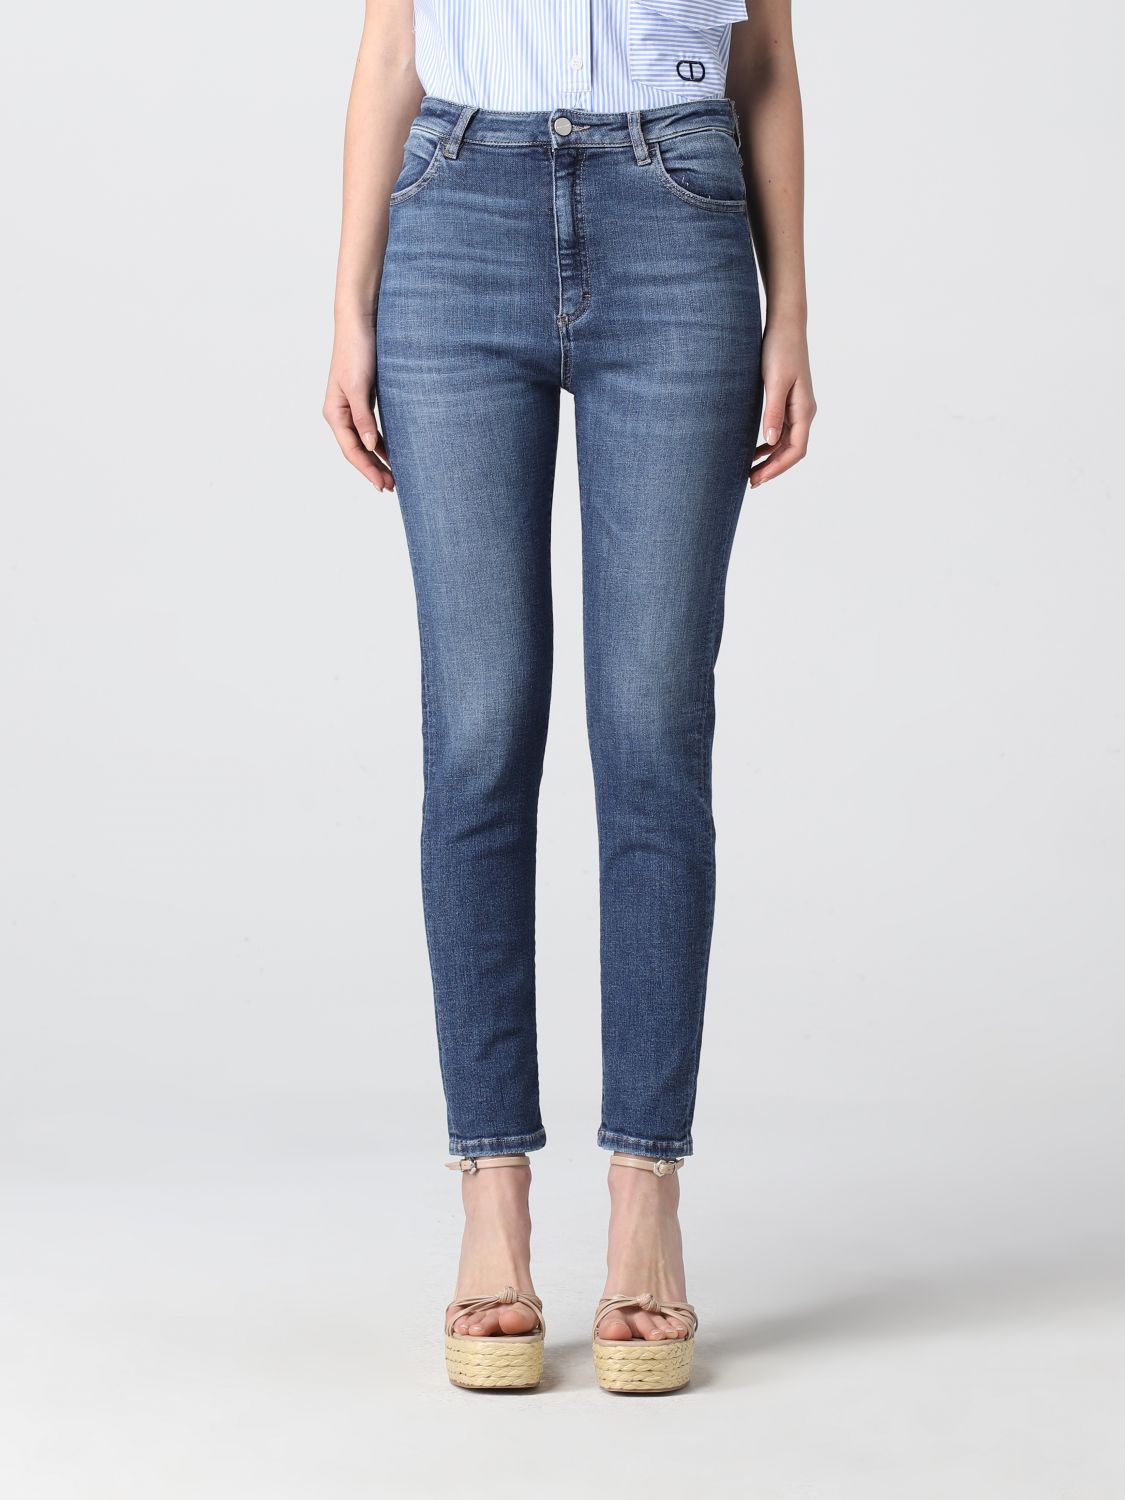 Icon Denim Los Angeles Cropped Jeans In Washed Denim In Stone Washed